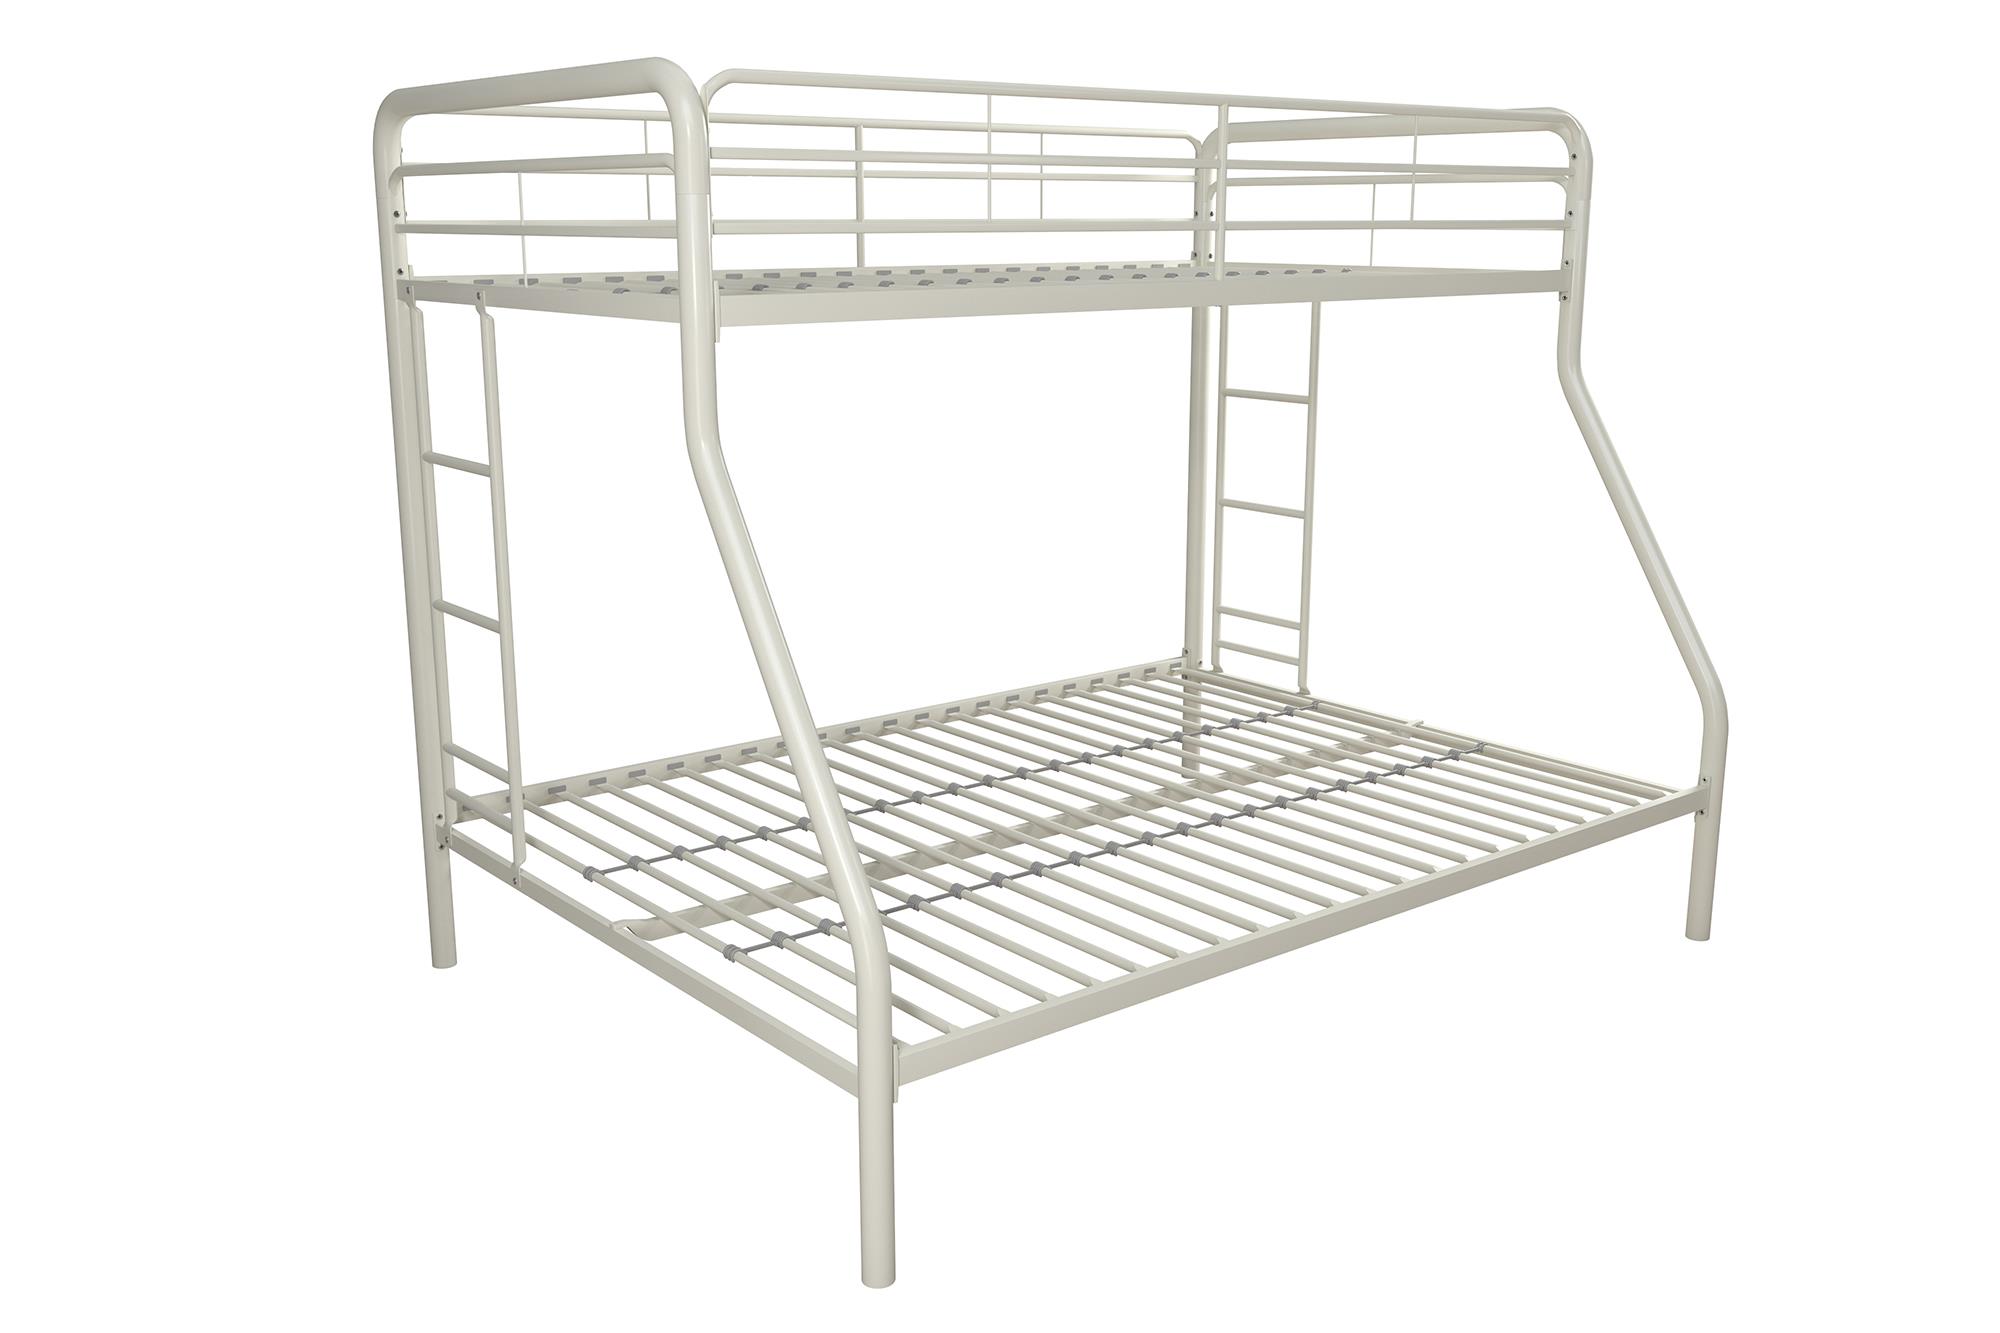 Dhp Twin Over Full Metal Bunk Bed Frame, Dorel Twin Over Full Metal Bunk Bed